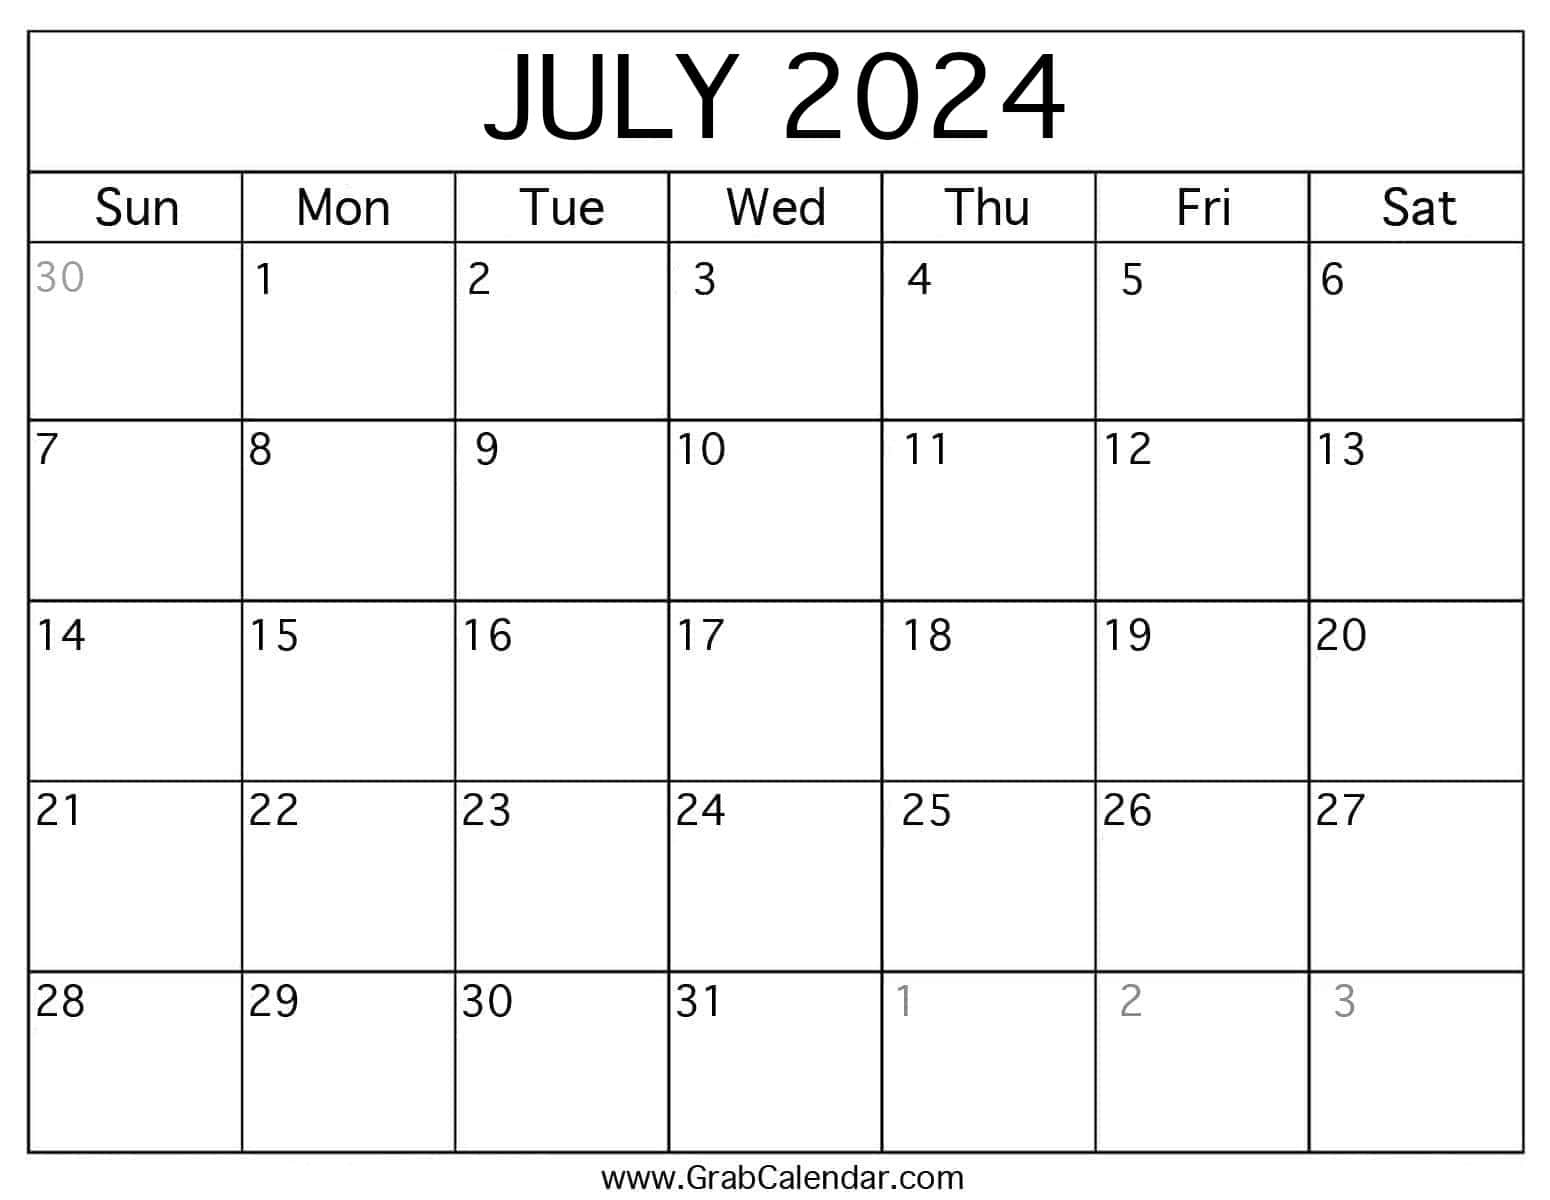 Printable July 2024 Calendar pertaining to Show a Calendar For July 2024